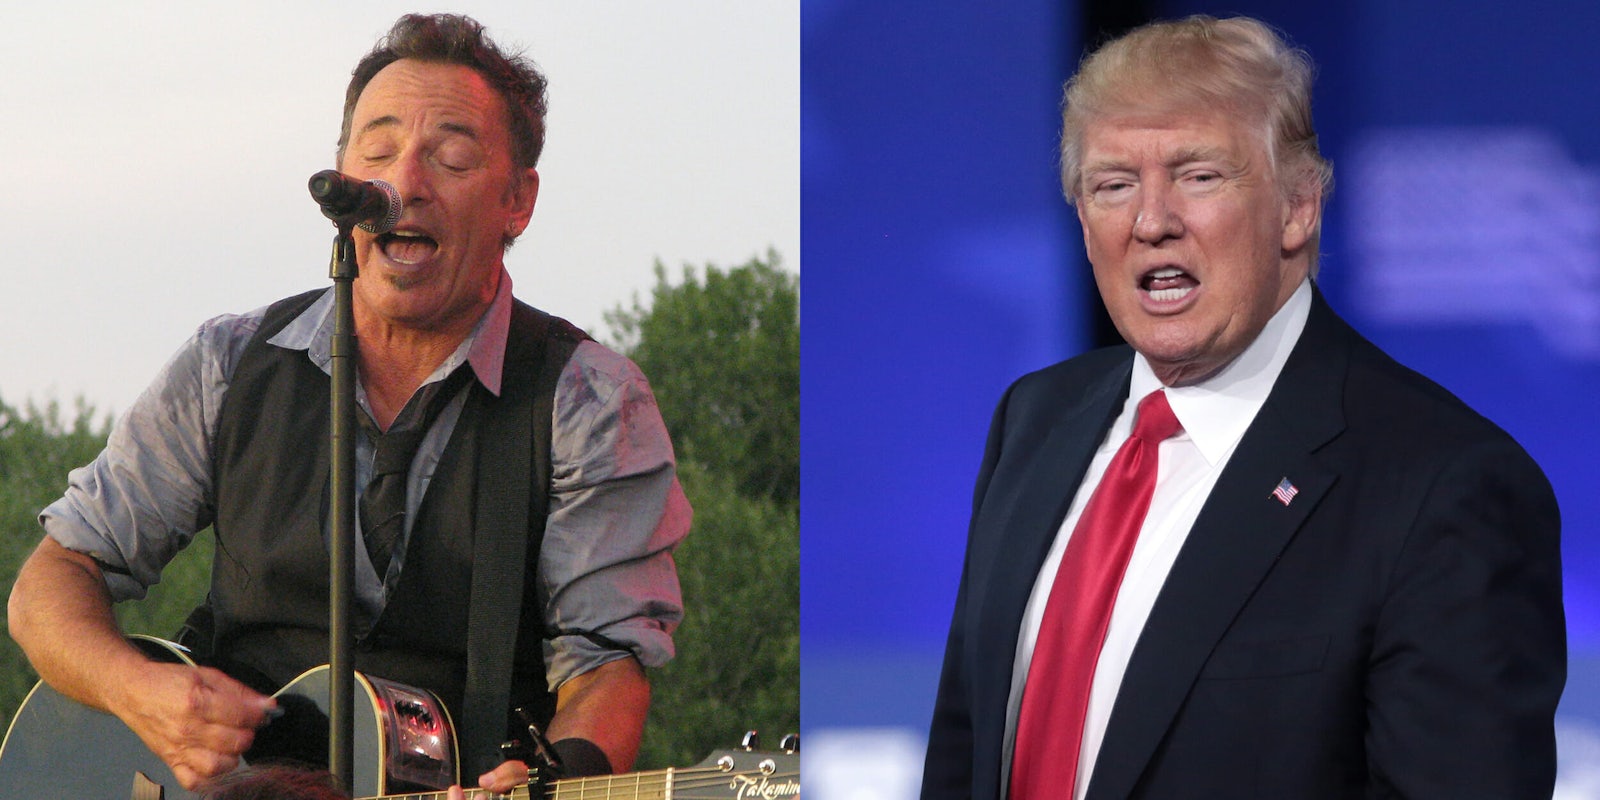 Bruce Springsteen and Donald Trump